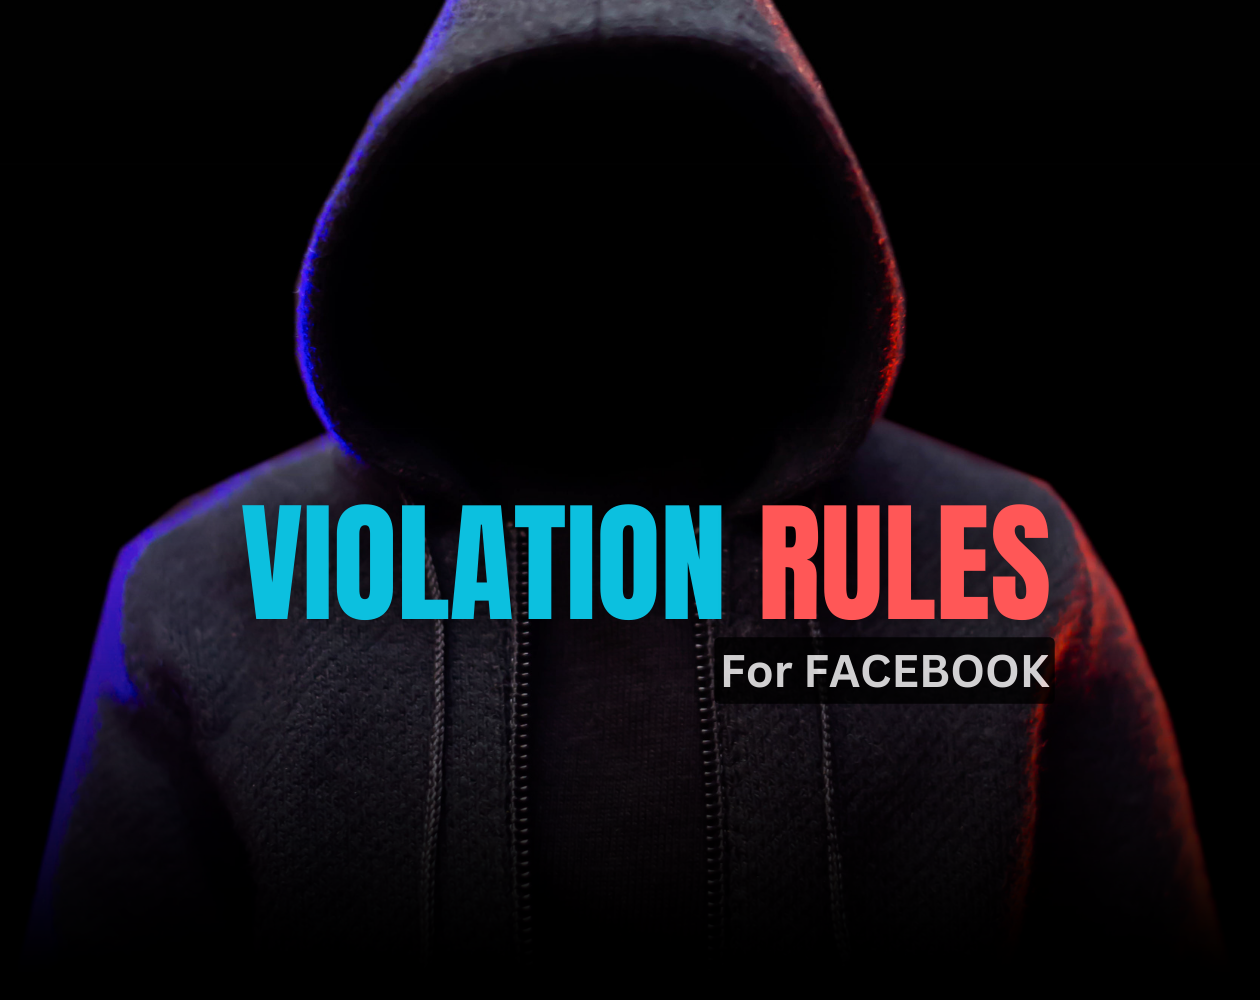 What are the Violation Rules for Facebook? Facebook's Community Standards